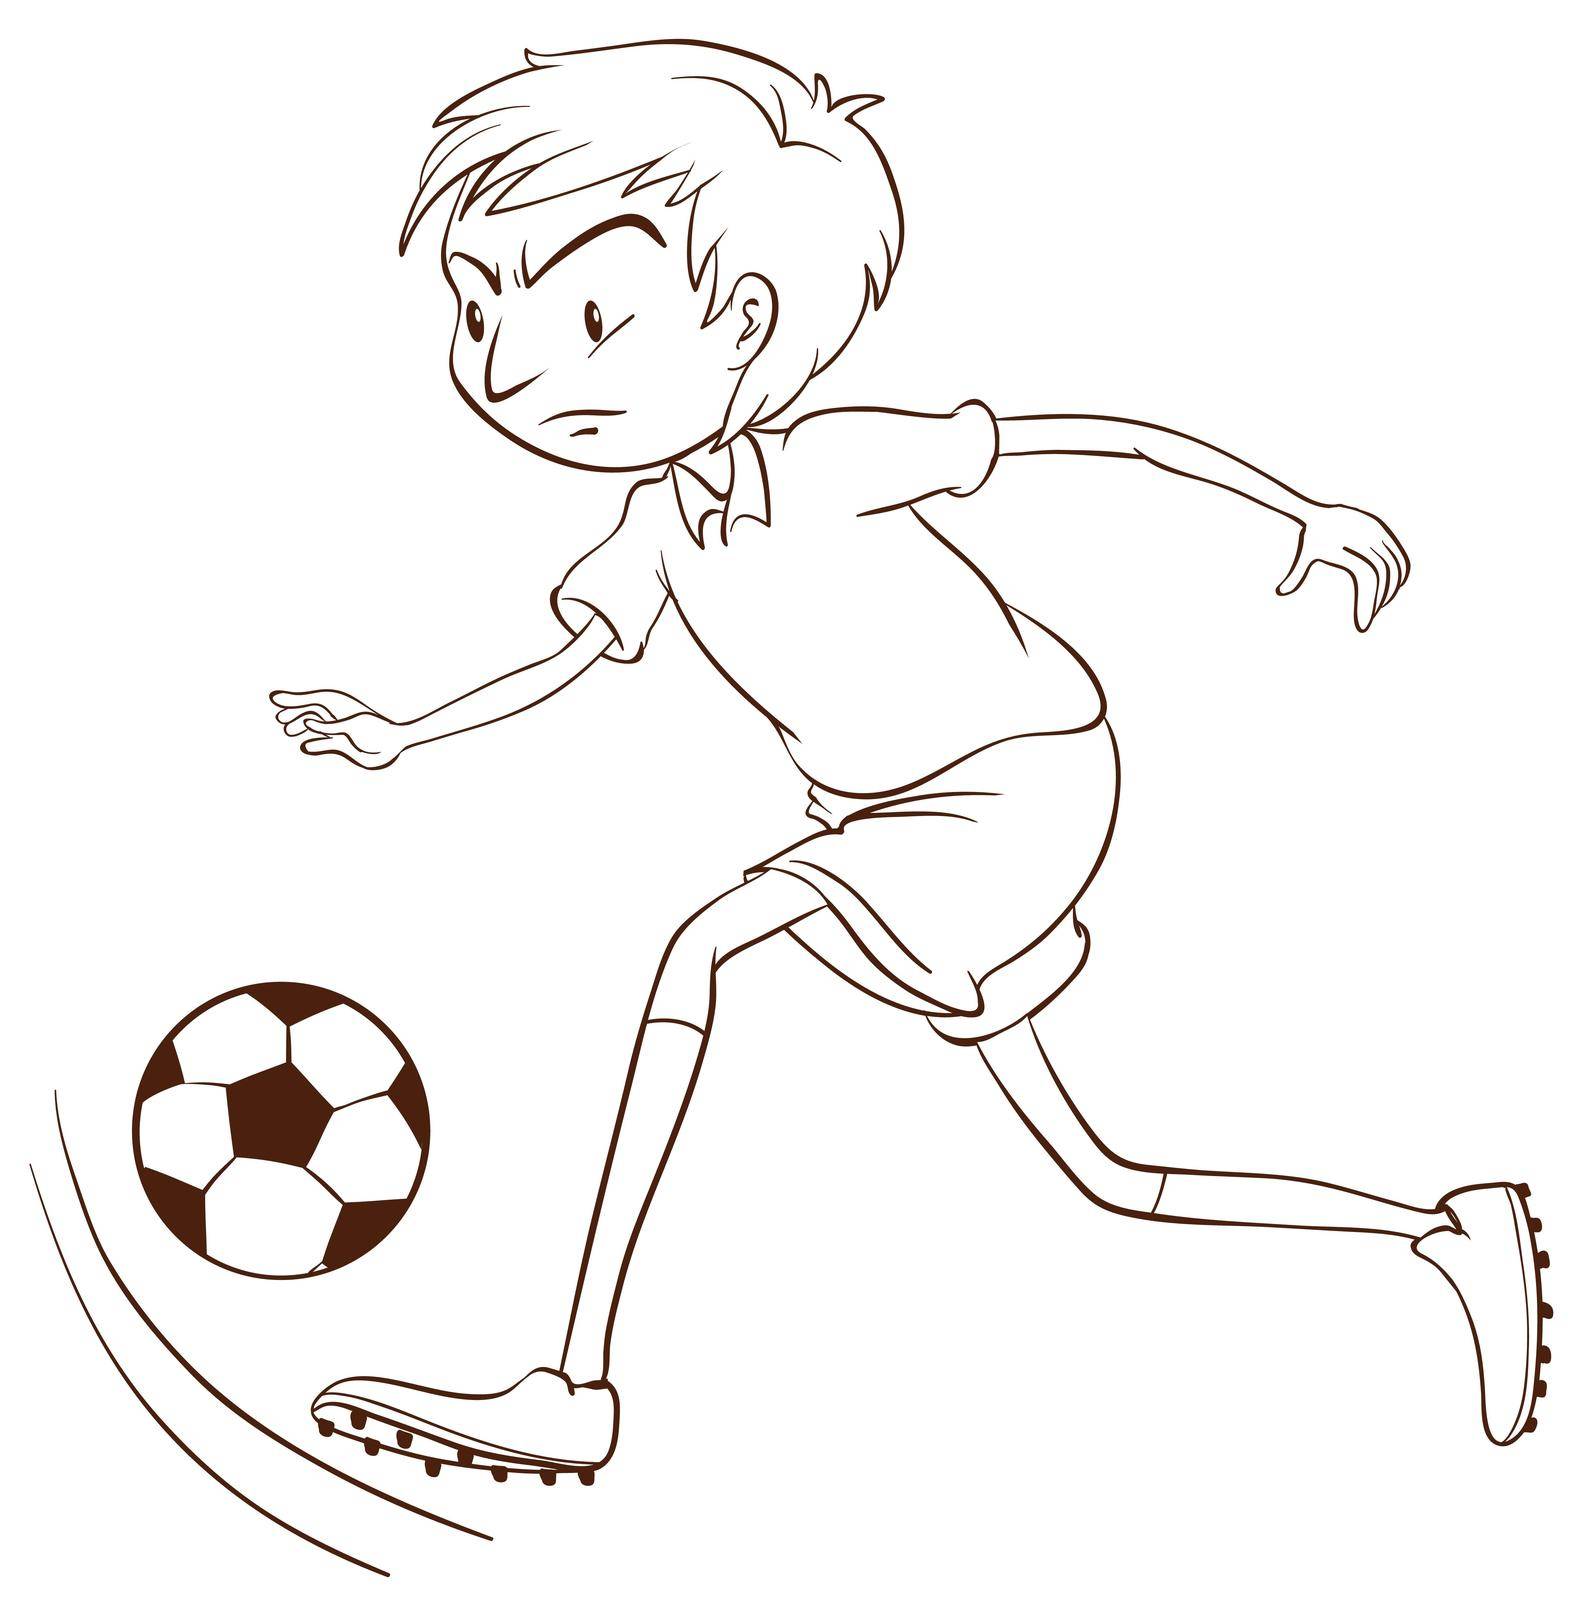 Illustration of a plain sketch of a soccer player on a white background